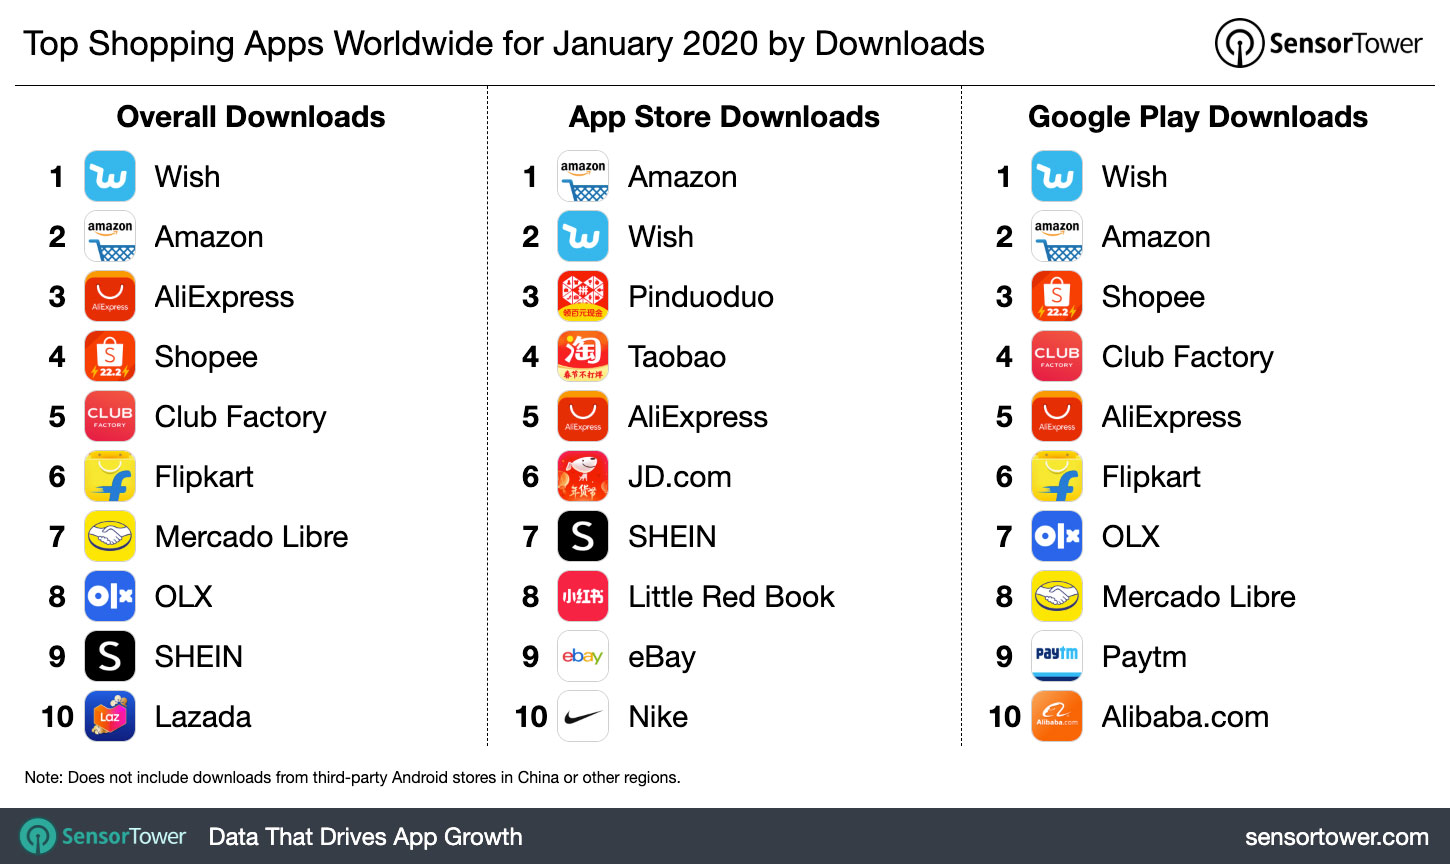 Top Shopping Apps Worldwide for January 2020 by Downloads